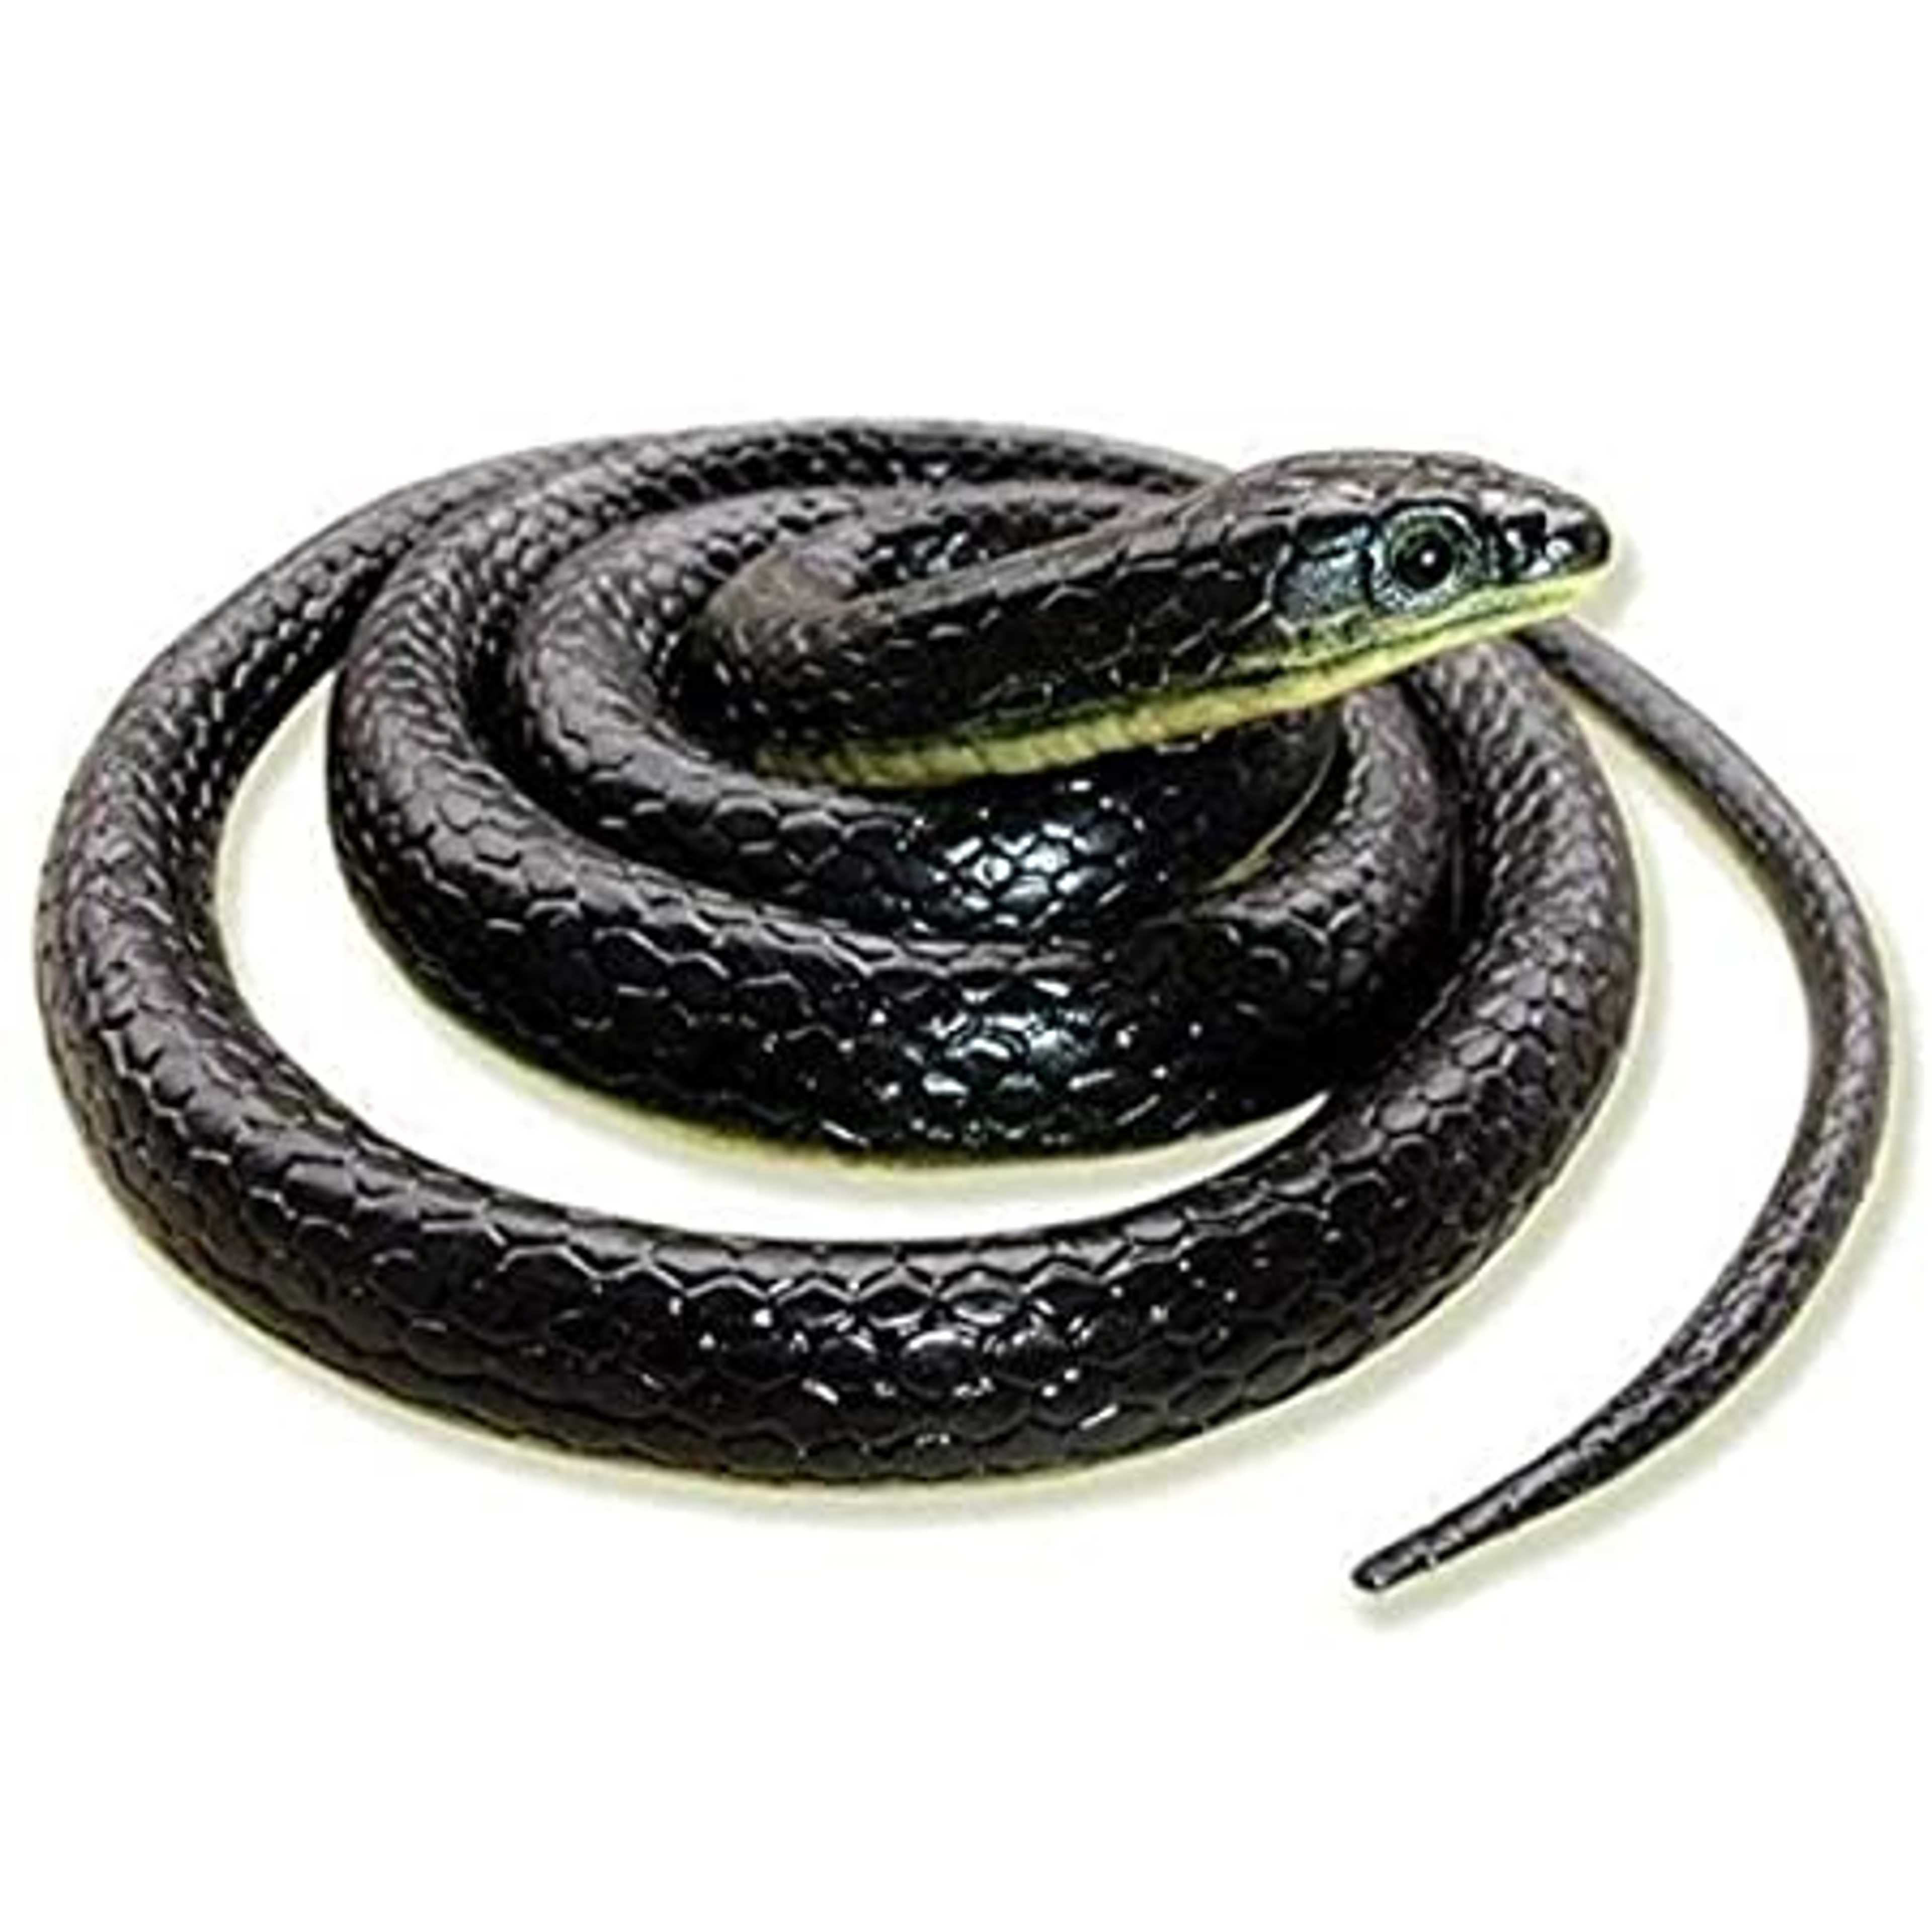 Artificial Rubber Snake 25-27 inch Lenght toy Snake (For Prank And Fun)